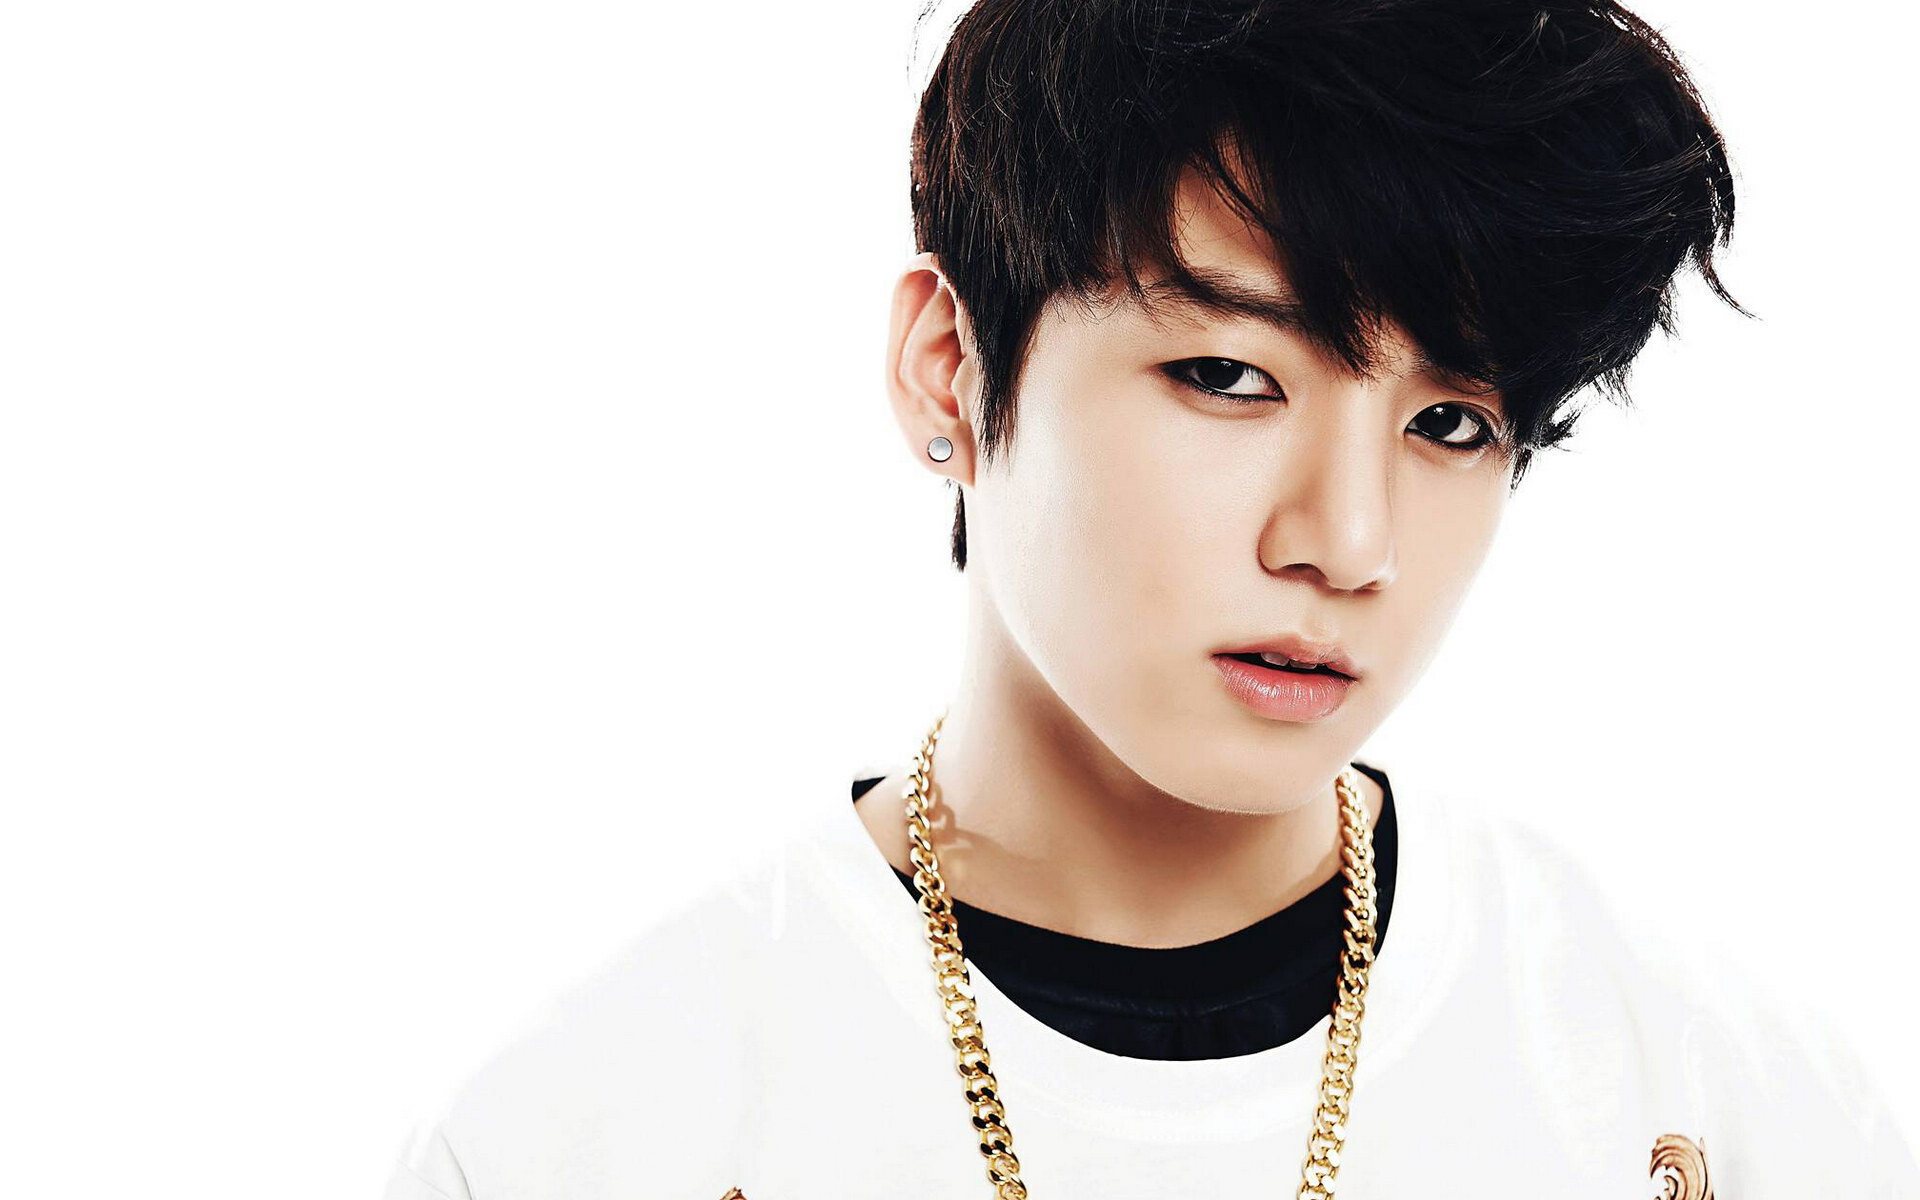 Jungkook: Ranked 1st in 'Top K-Pop Stars' for 3 consecutive years, Tumblr. 1920x1200 HD Wallpaper.